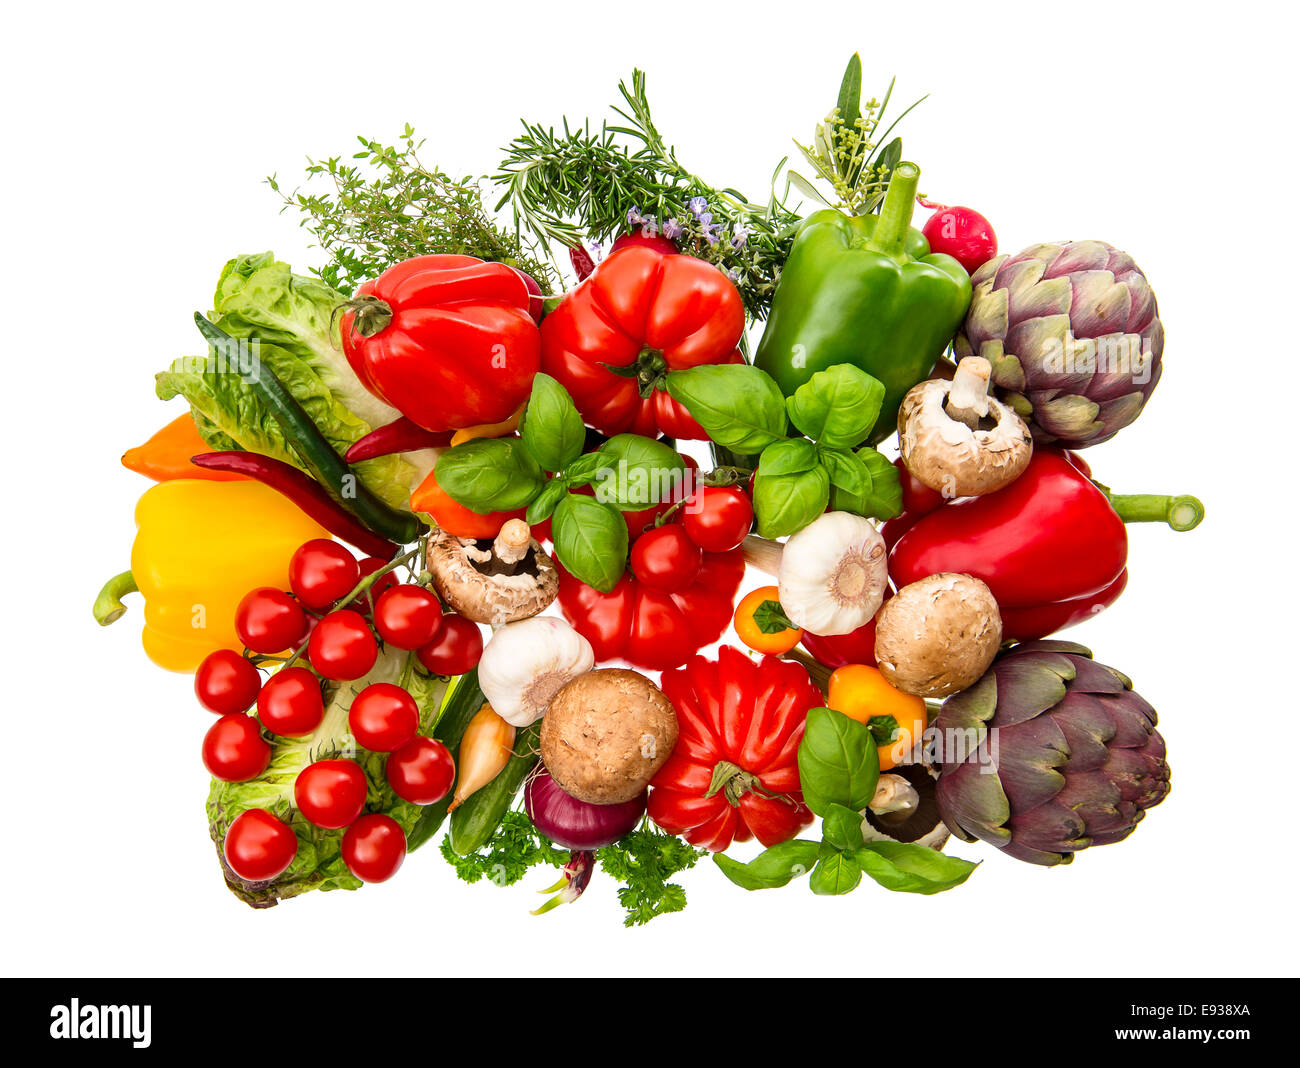 vegetables and herbs isolated on white background. diary healthy food ingredients Stock Photo